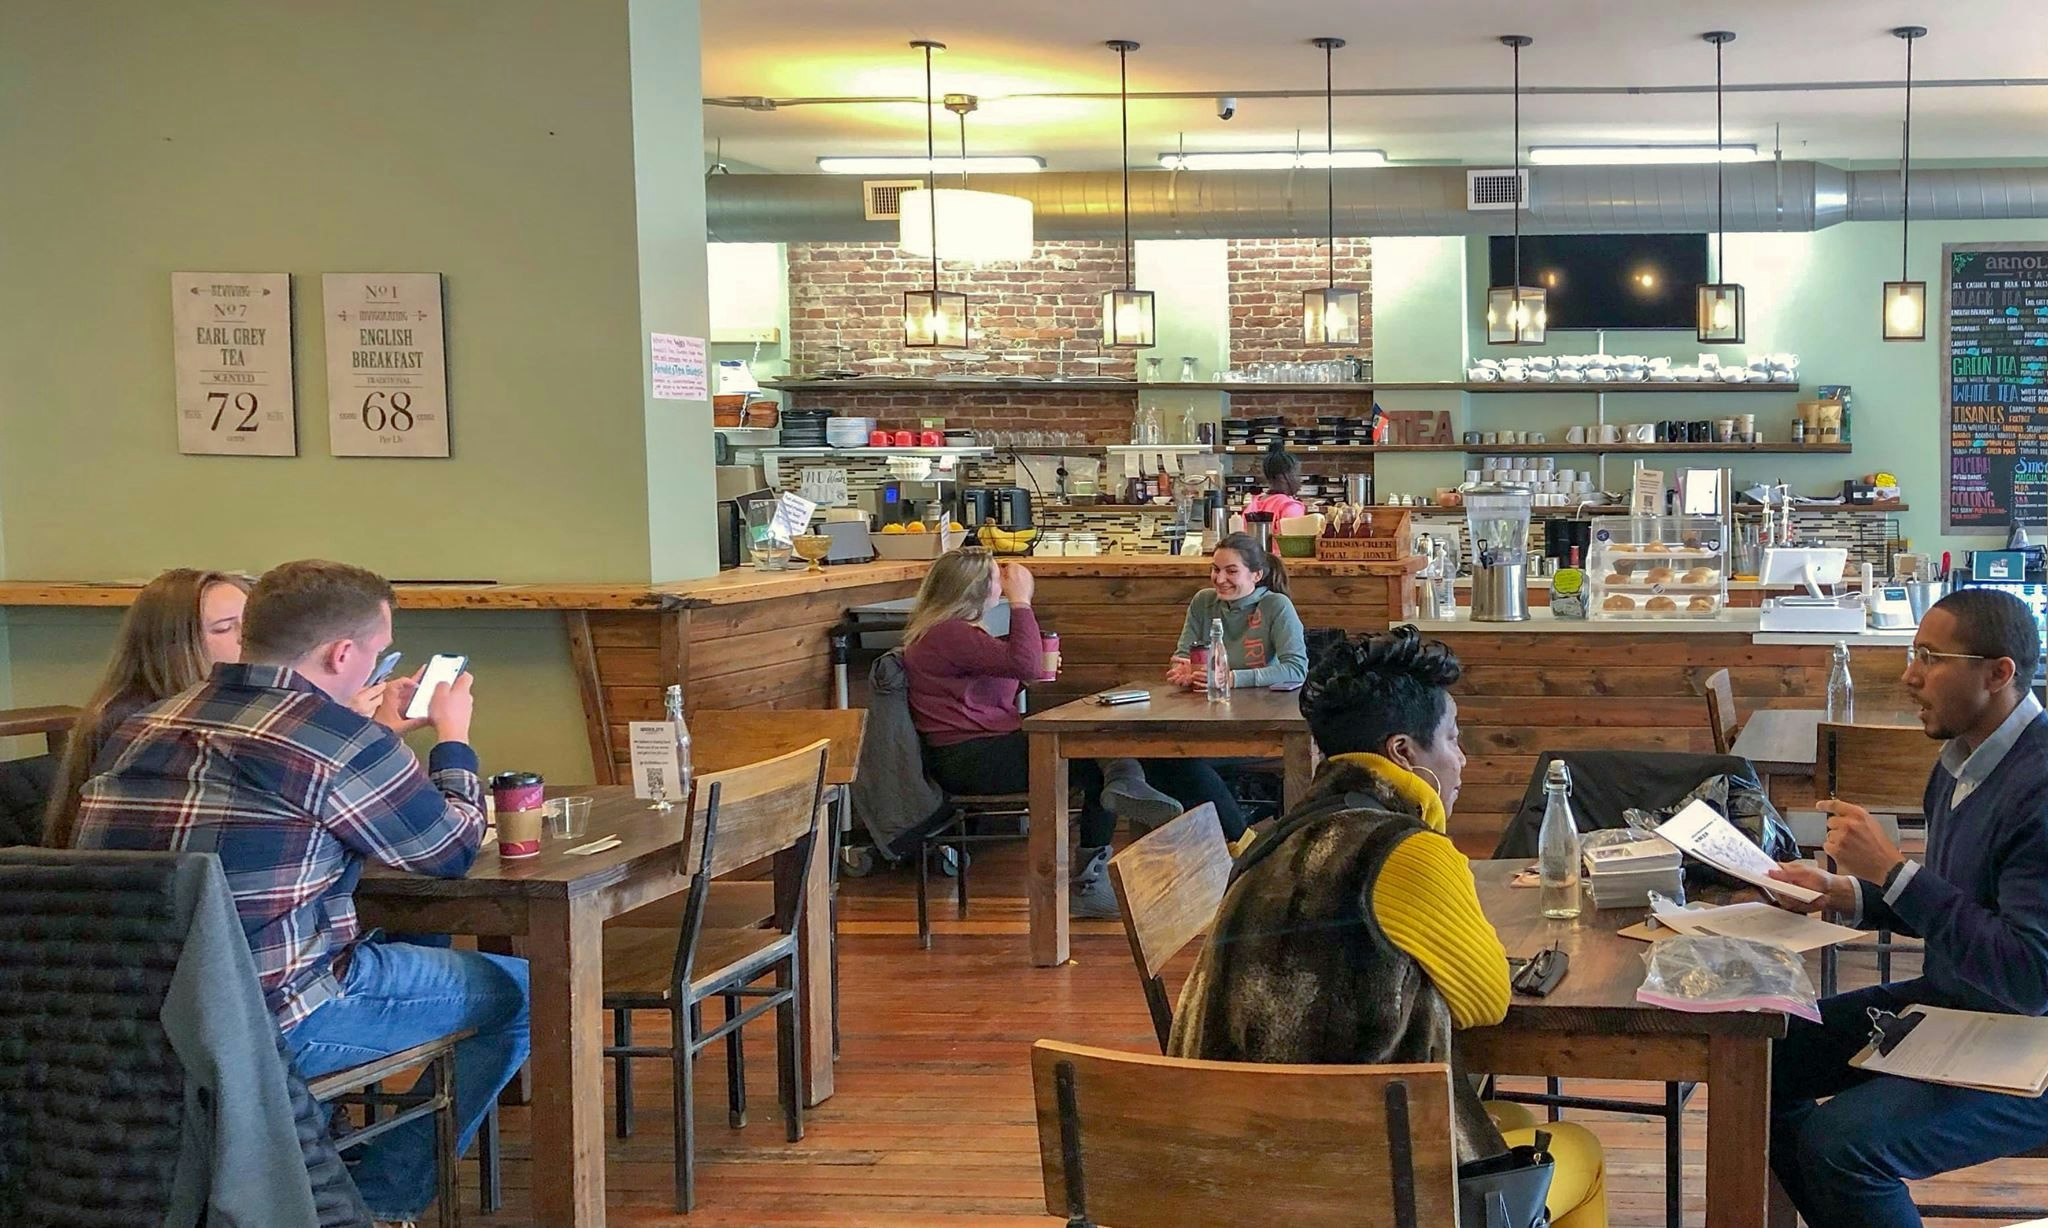 The homey interior of Arnold's Tea in Pittsburgh has light green walls, wide hardwood floors, chunky wooden tables and chairs, and wood boards lining the front of the counter, behind which are exposed brick accents, open wooden shelves lined with mugs, and a chalkboard with tea specials. Several pairs of patrons fill the tables in the forground